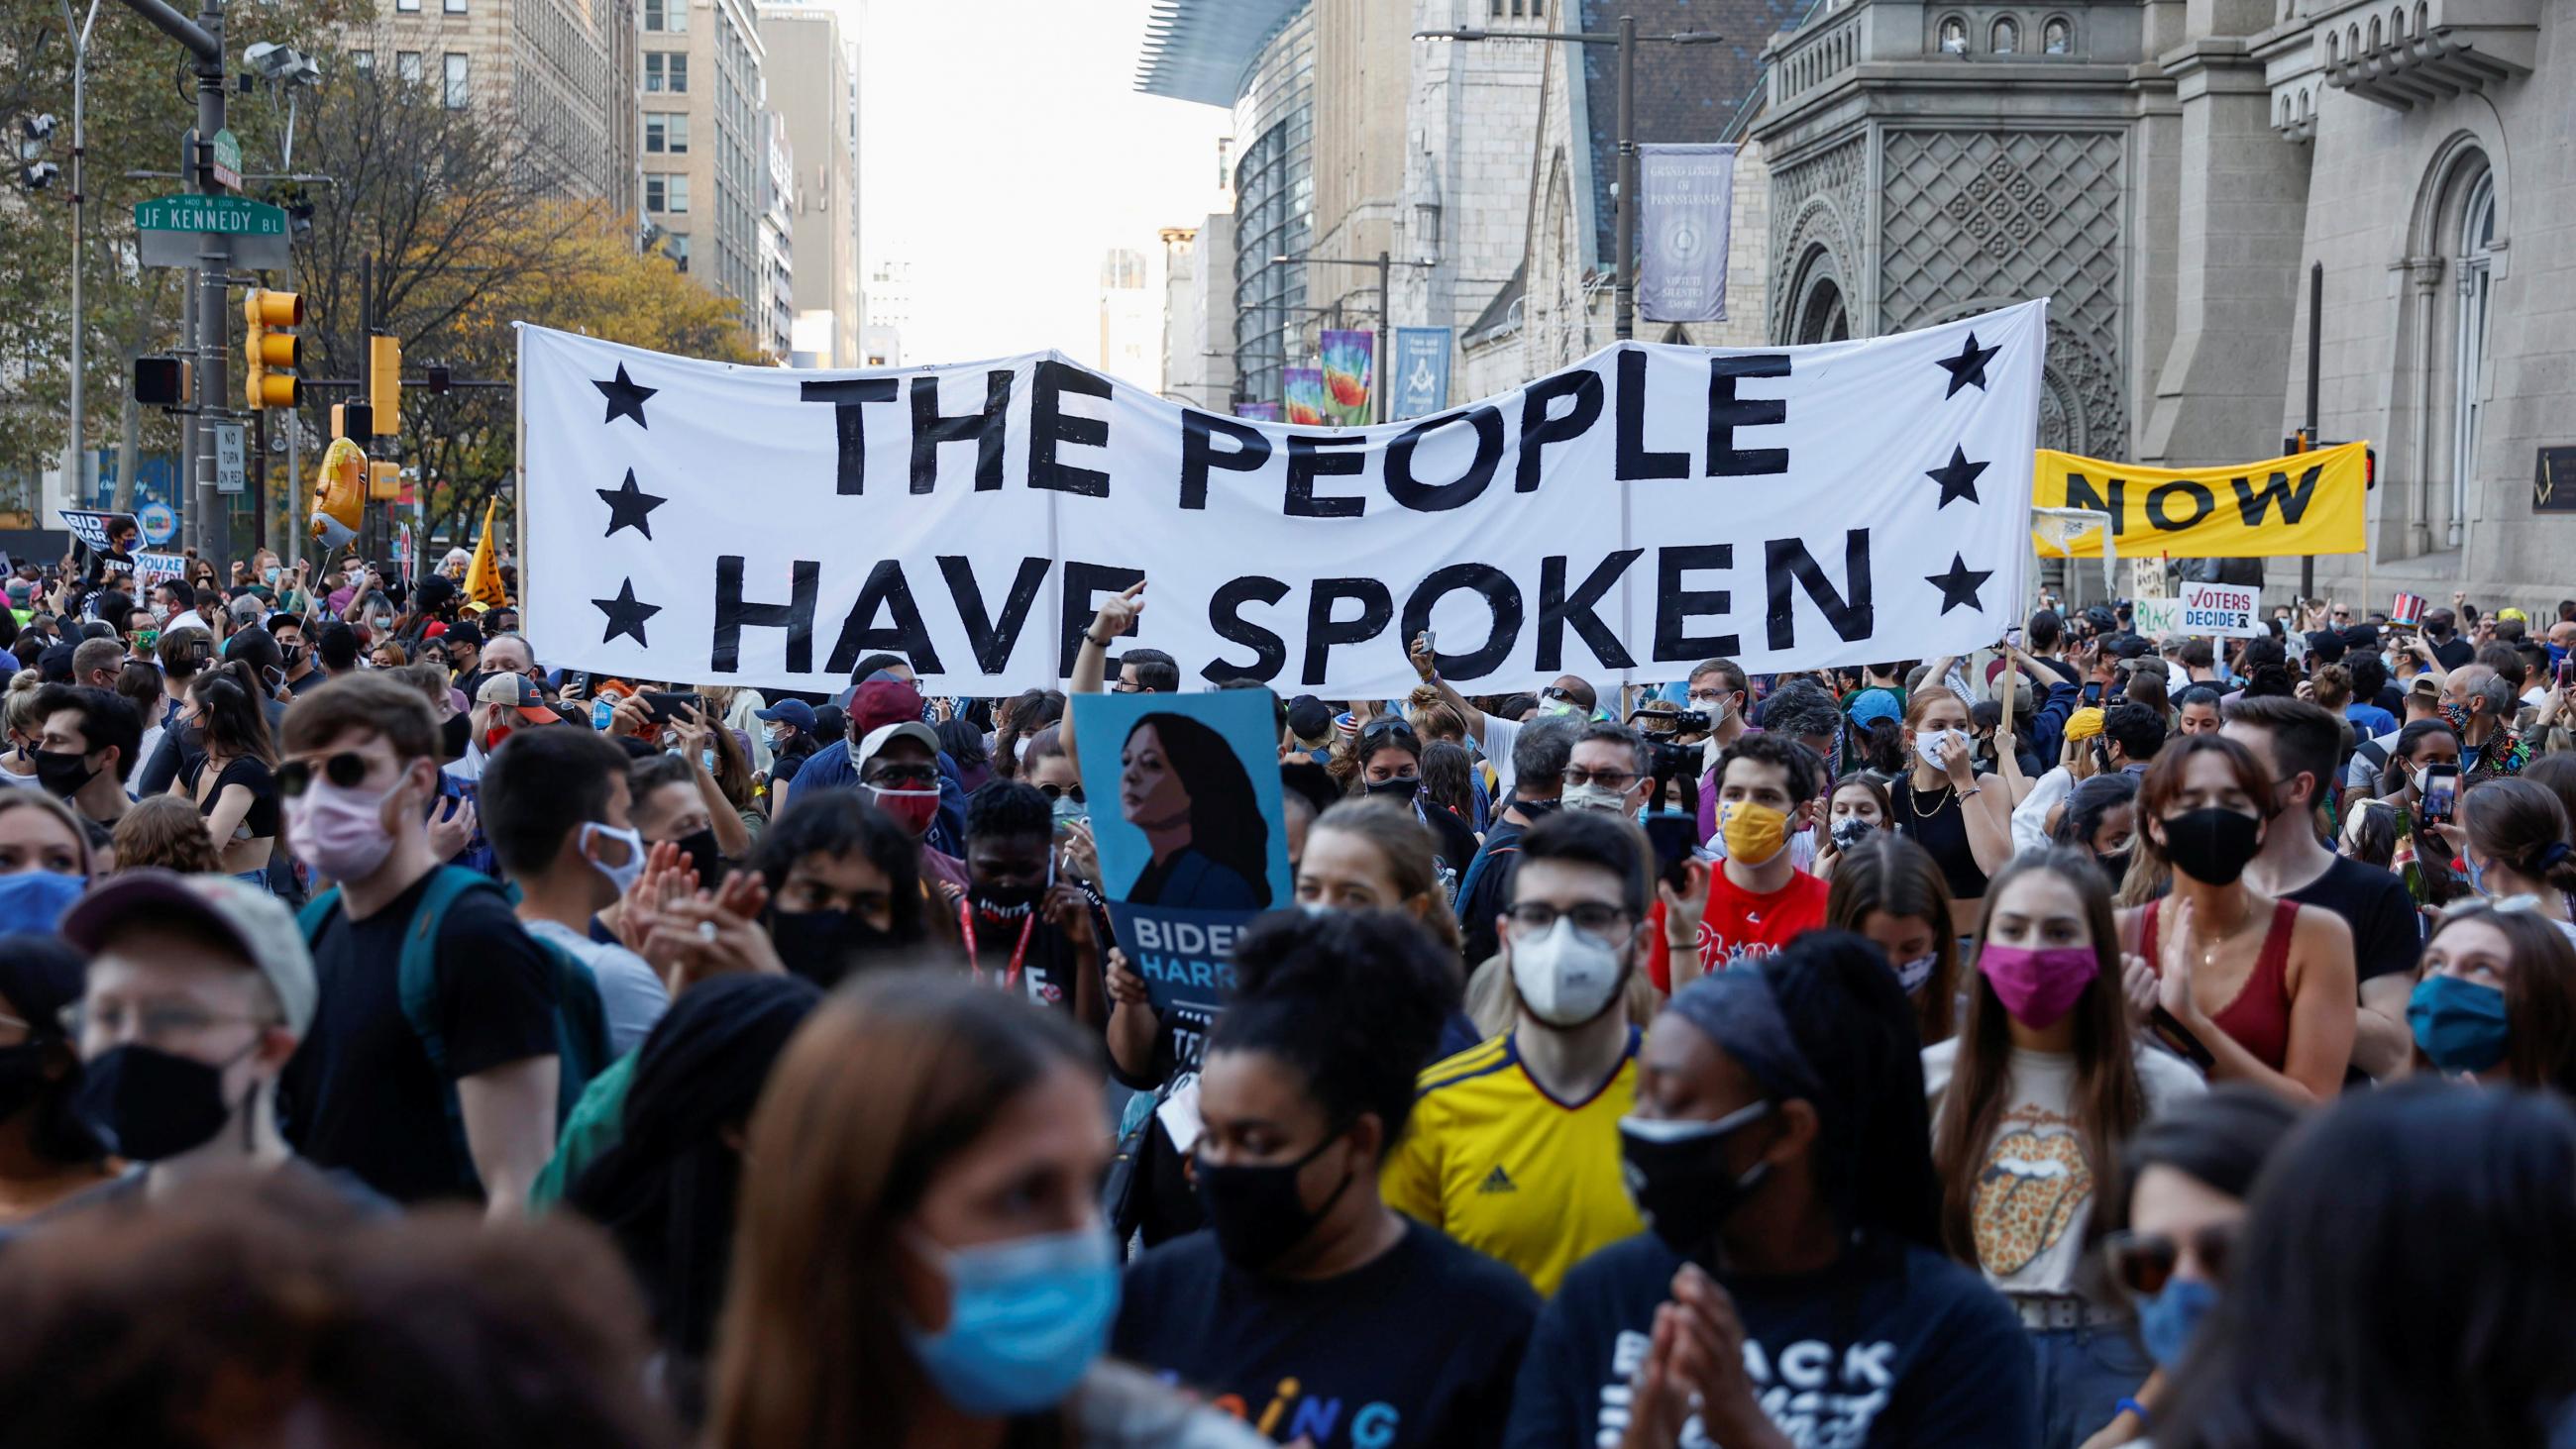 Densely packed crowds celebrate, carrying a sign that reads, "The People Have Spoken," after former Vice President Joe Biden is declared the winner of U.S. presidential race in Philadelphia, Pennsylvania on November 7, 2020.